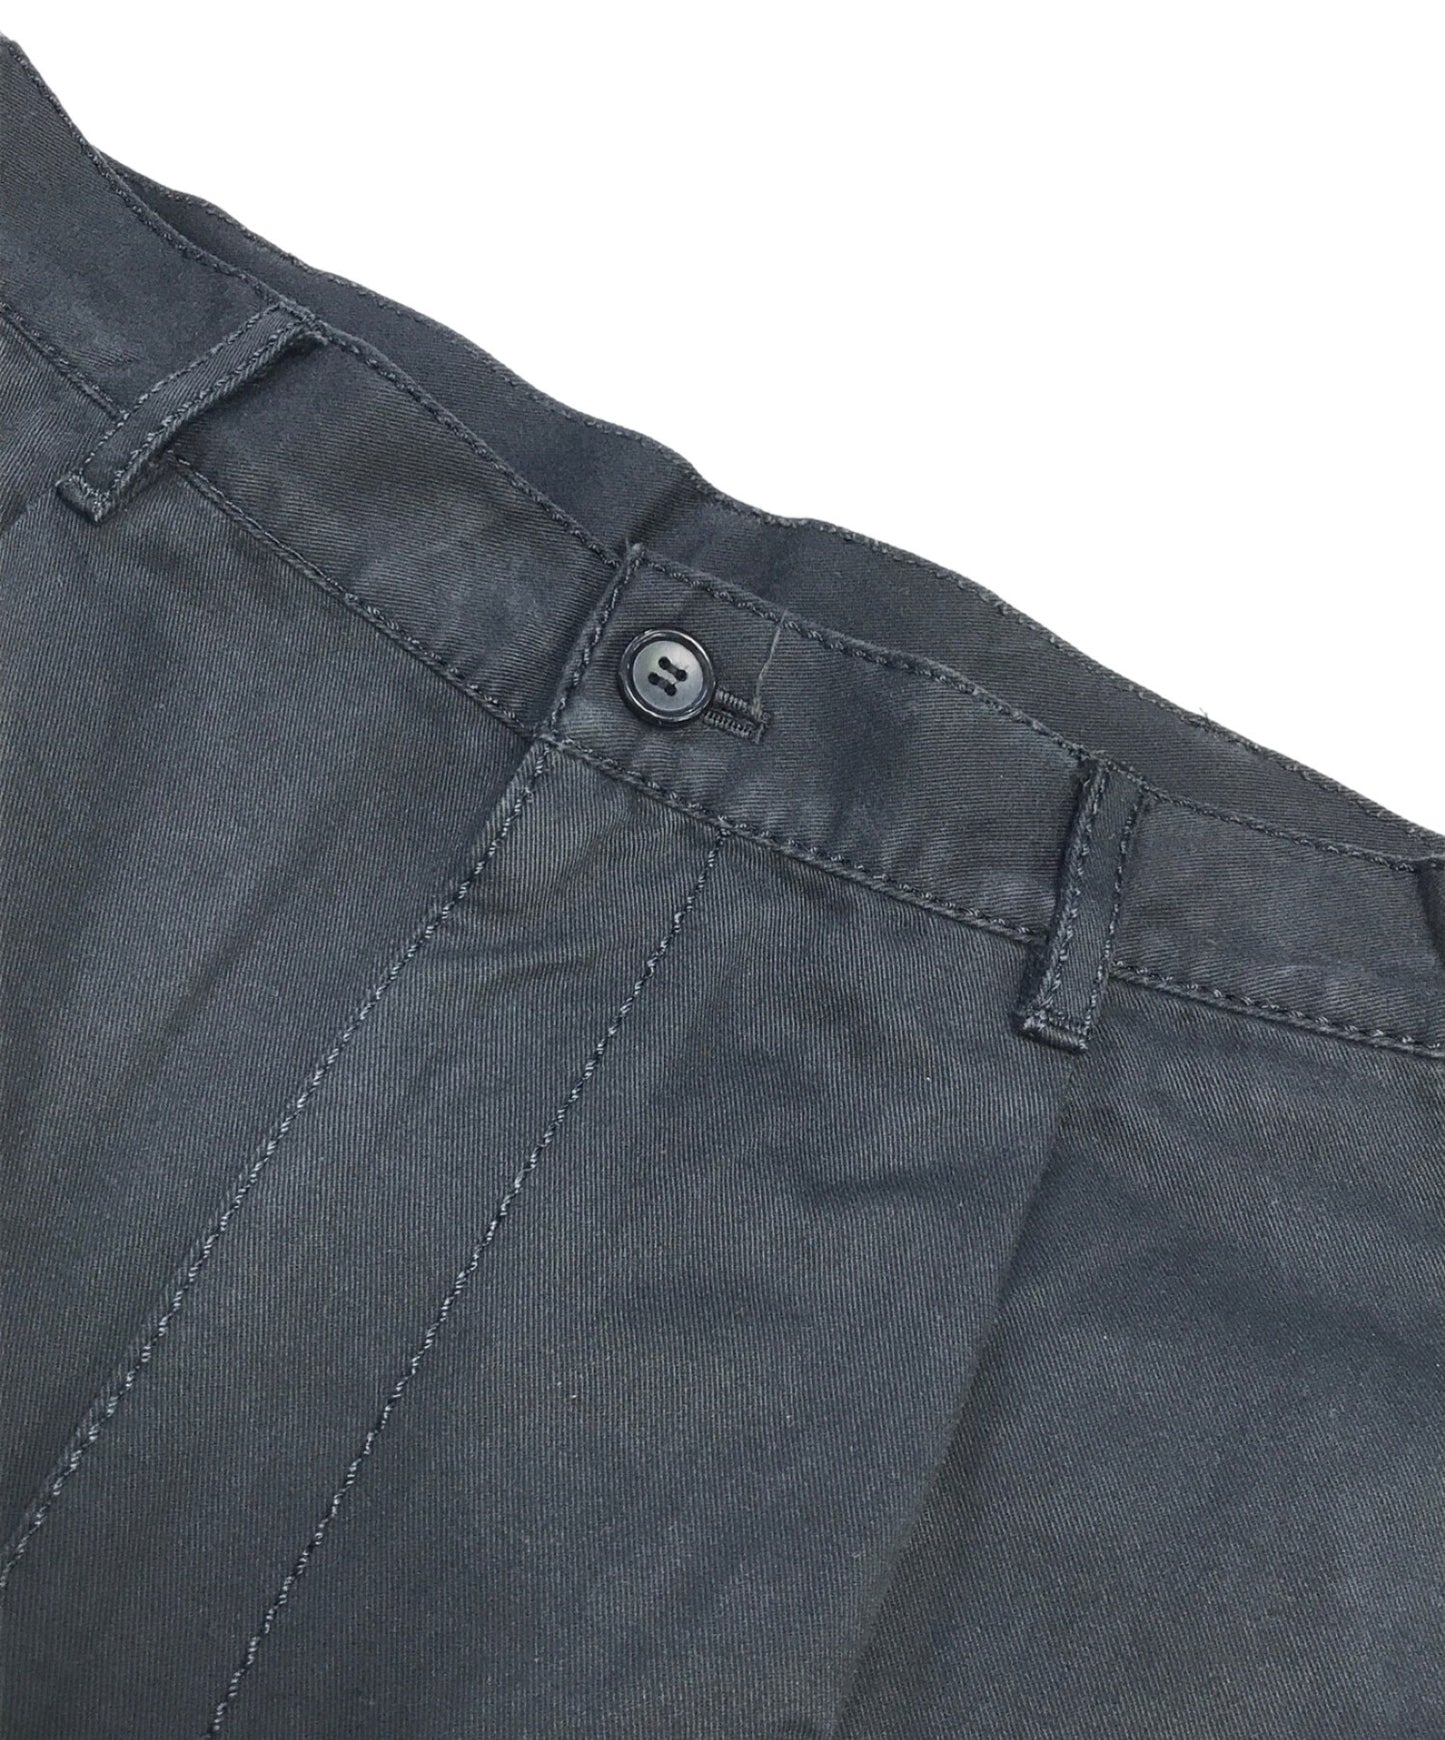 Comme des Garcons Homme Fat Stitch Tuck Chino 바지 HF-P015